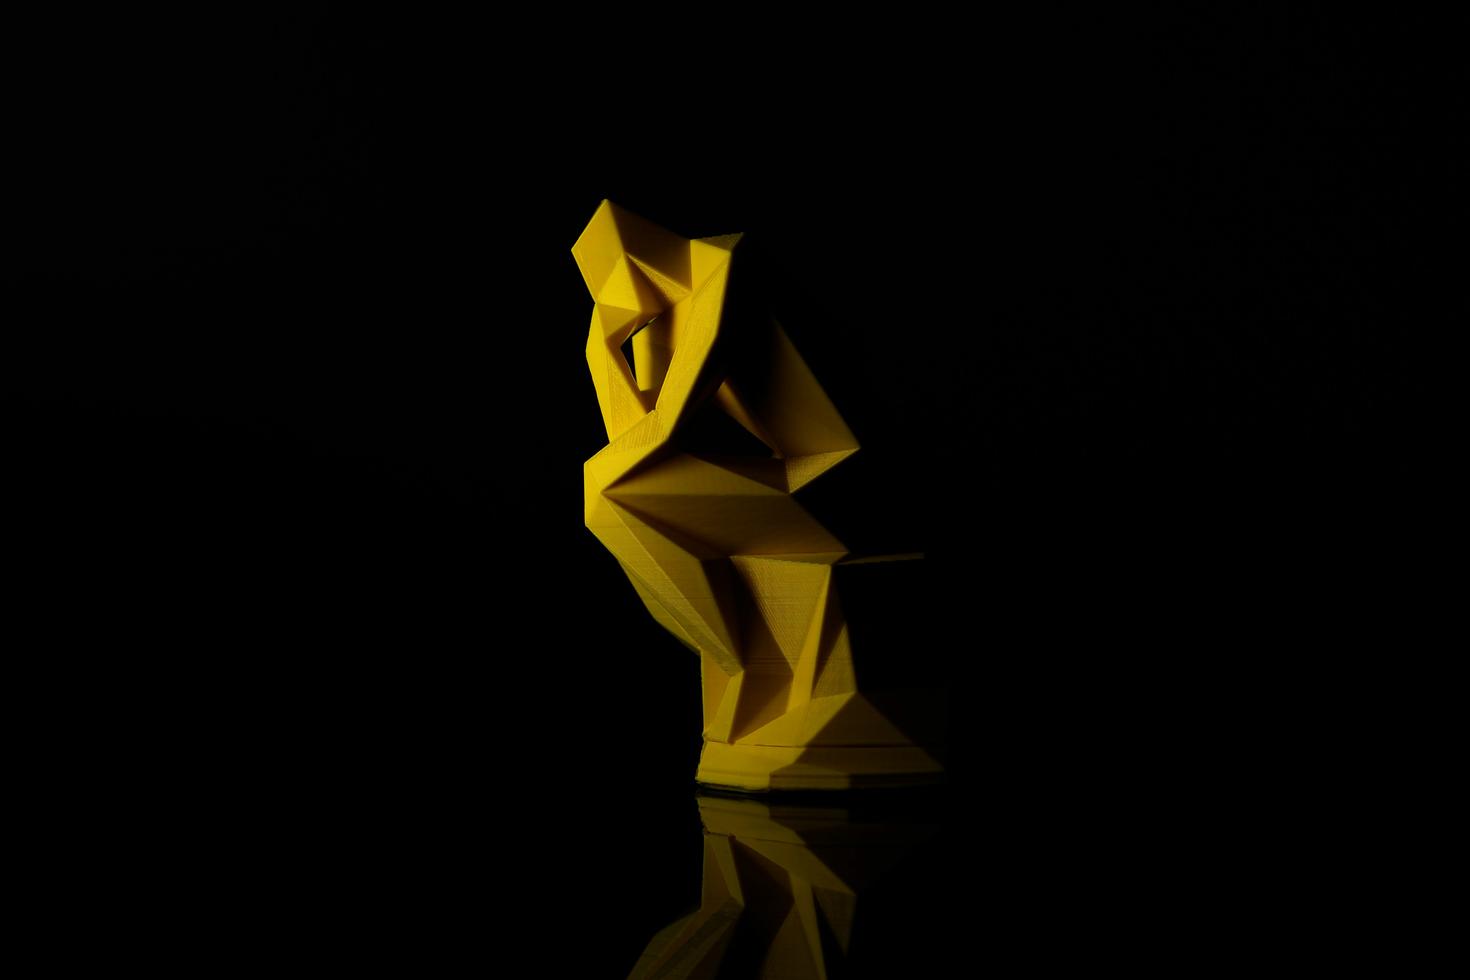 The Thinker made of geometric shapes